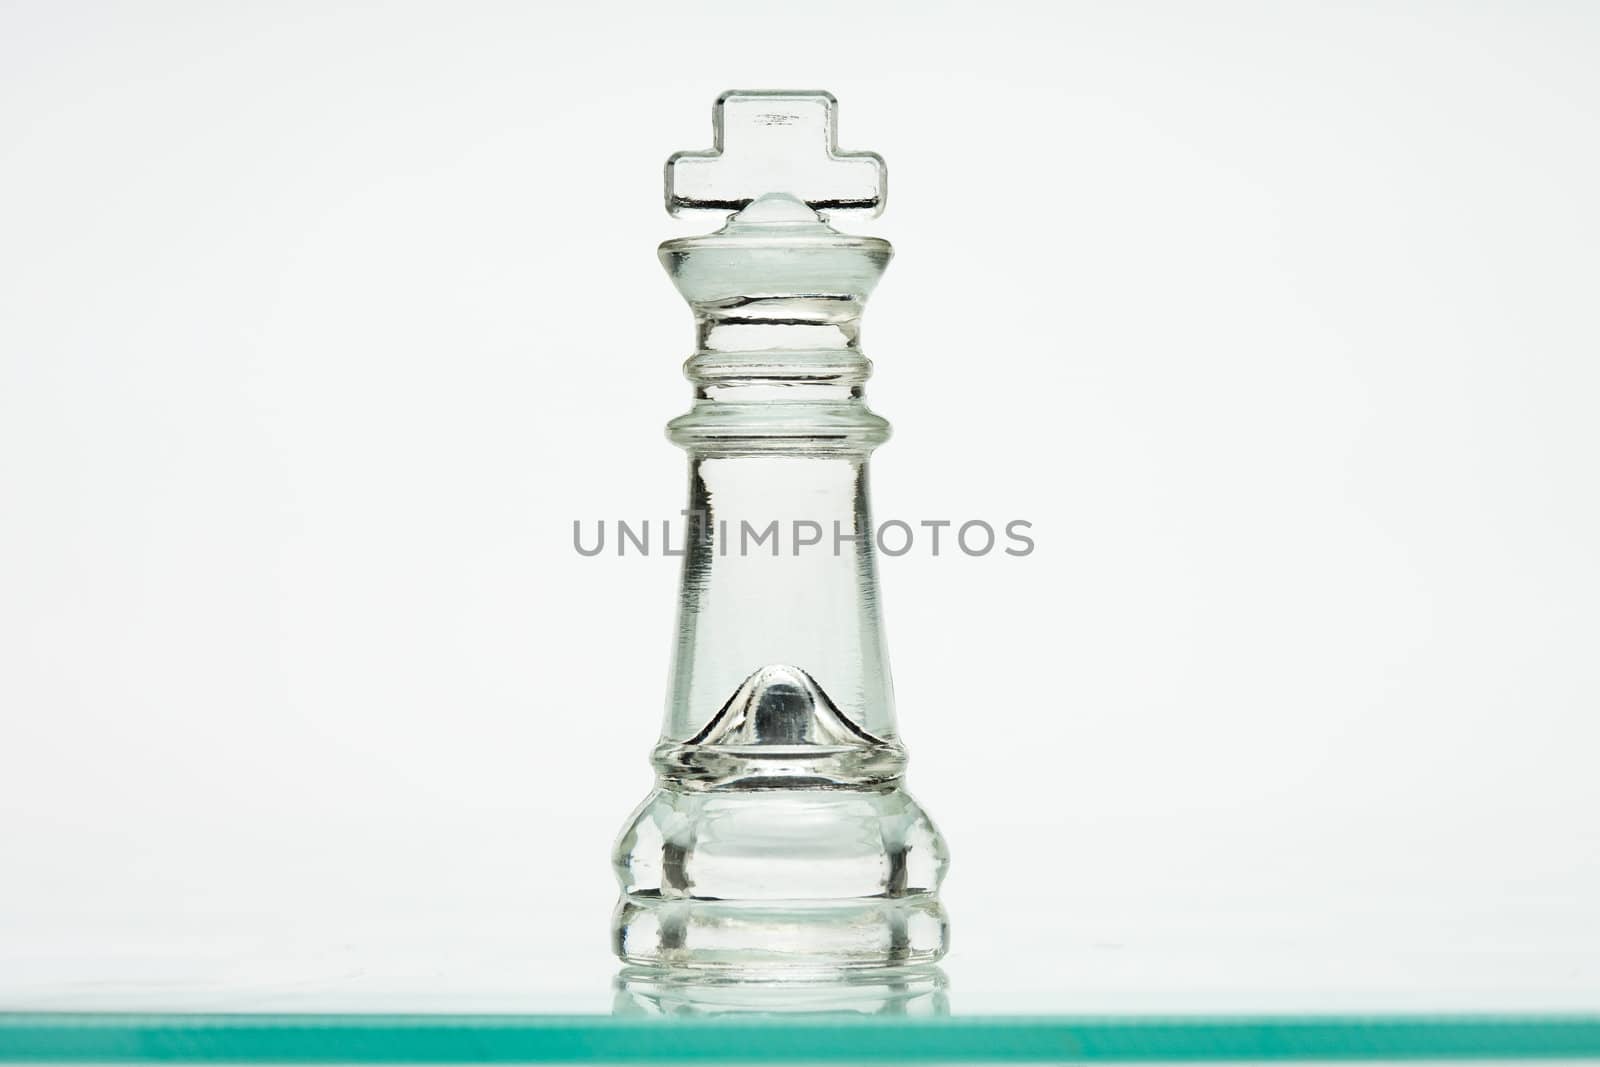 Chess transparent, white background, the king alone in the center